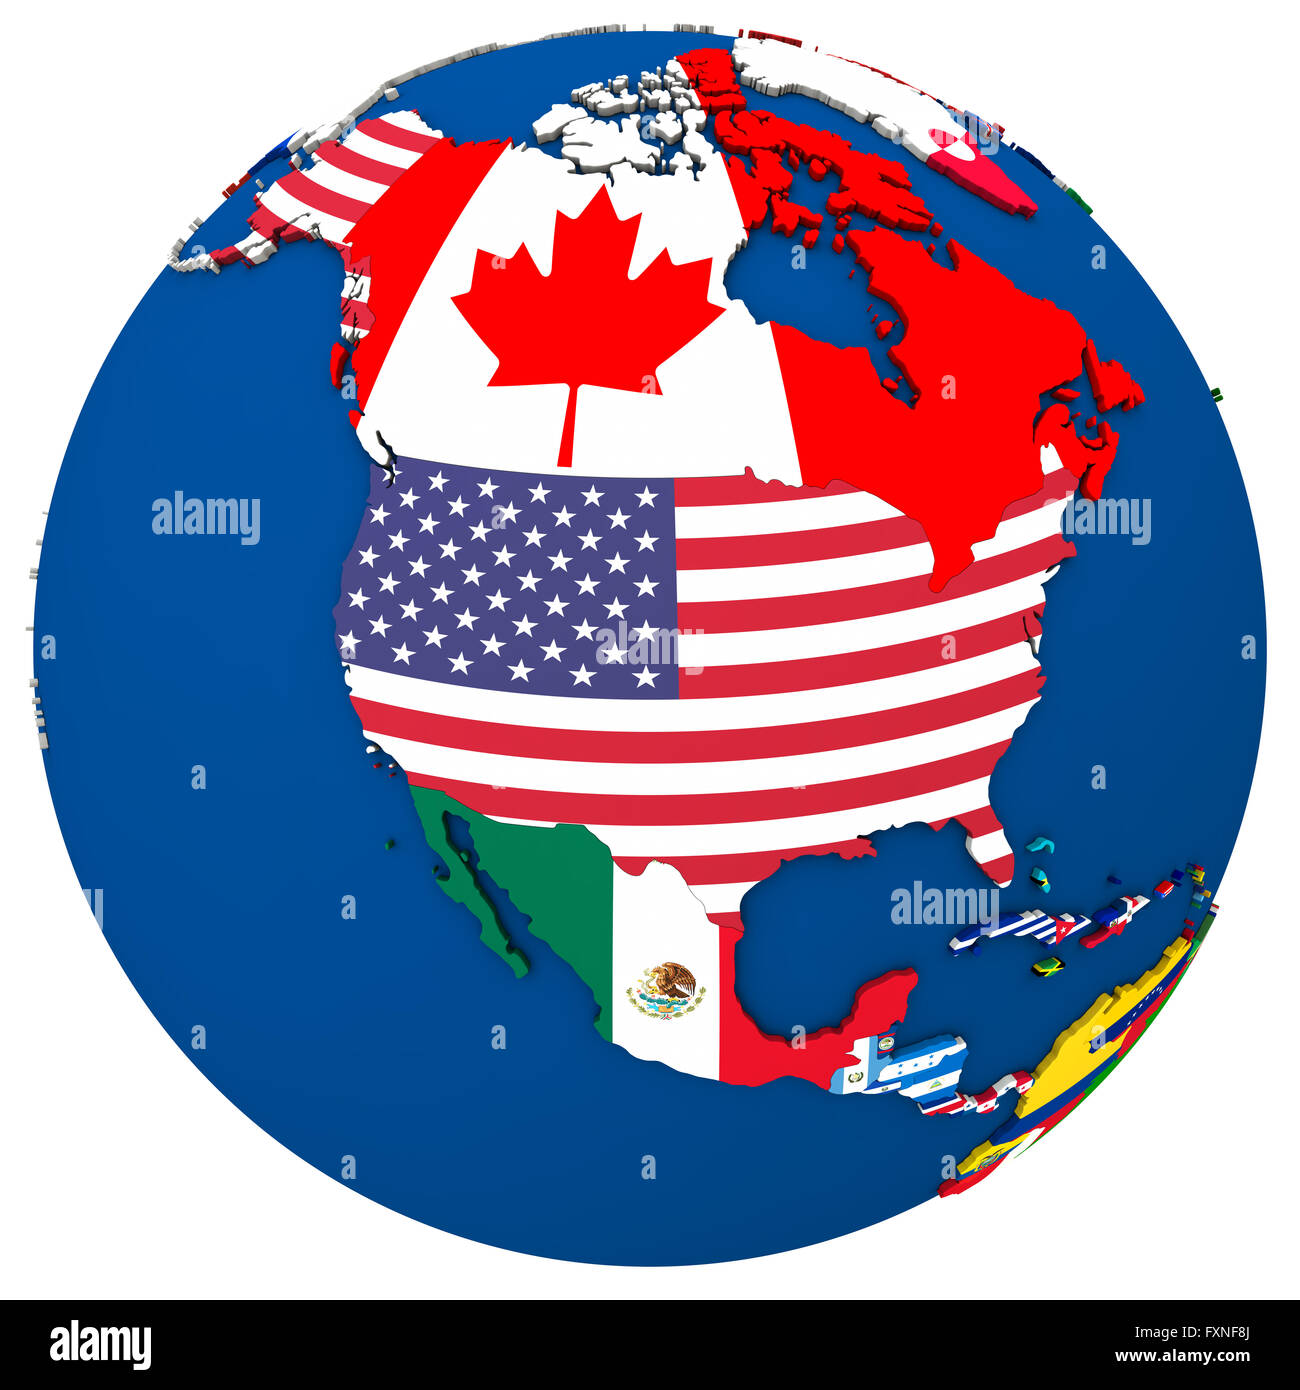 north american countries